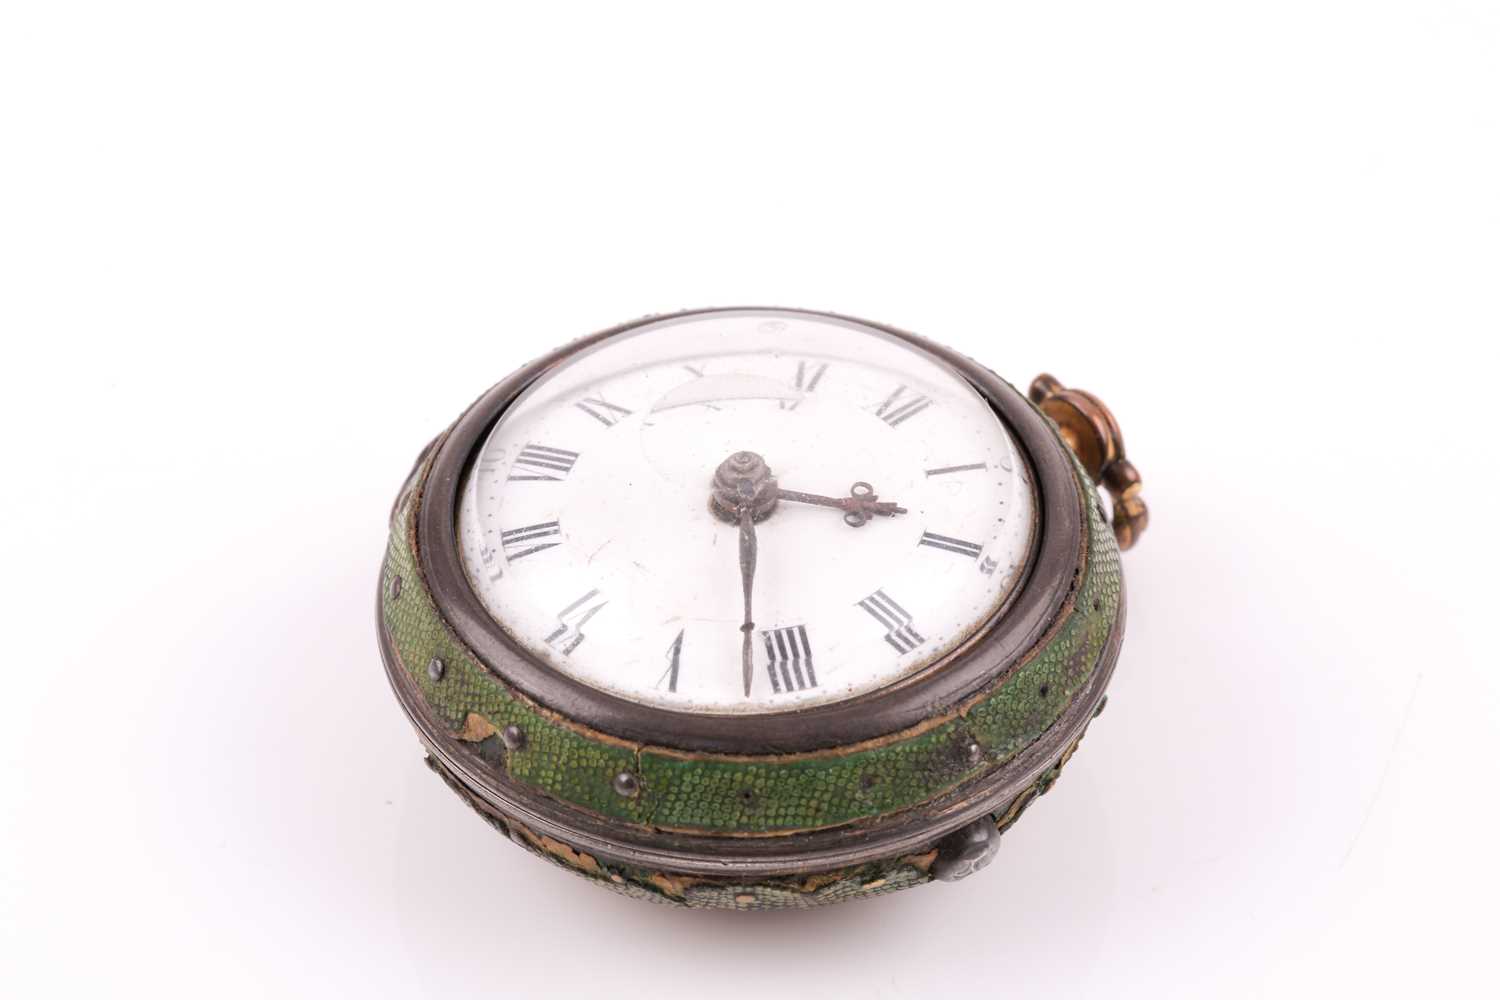 A George II silver gilt pair-cased pocket watch, by John Atkinson of London, hallmarked London 1746, - Image 5 of 5